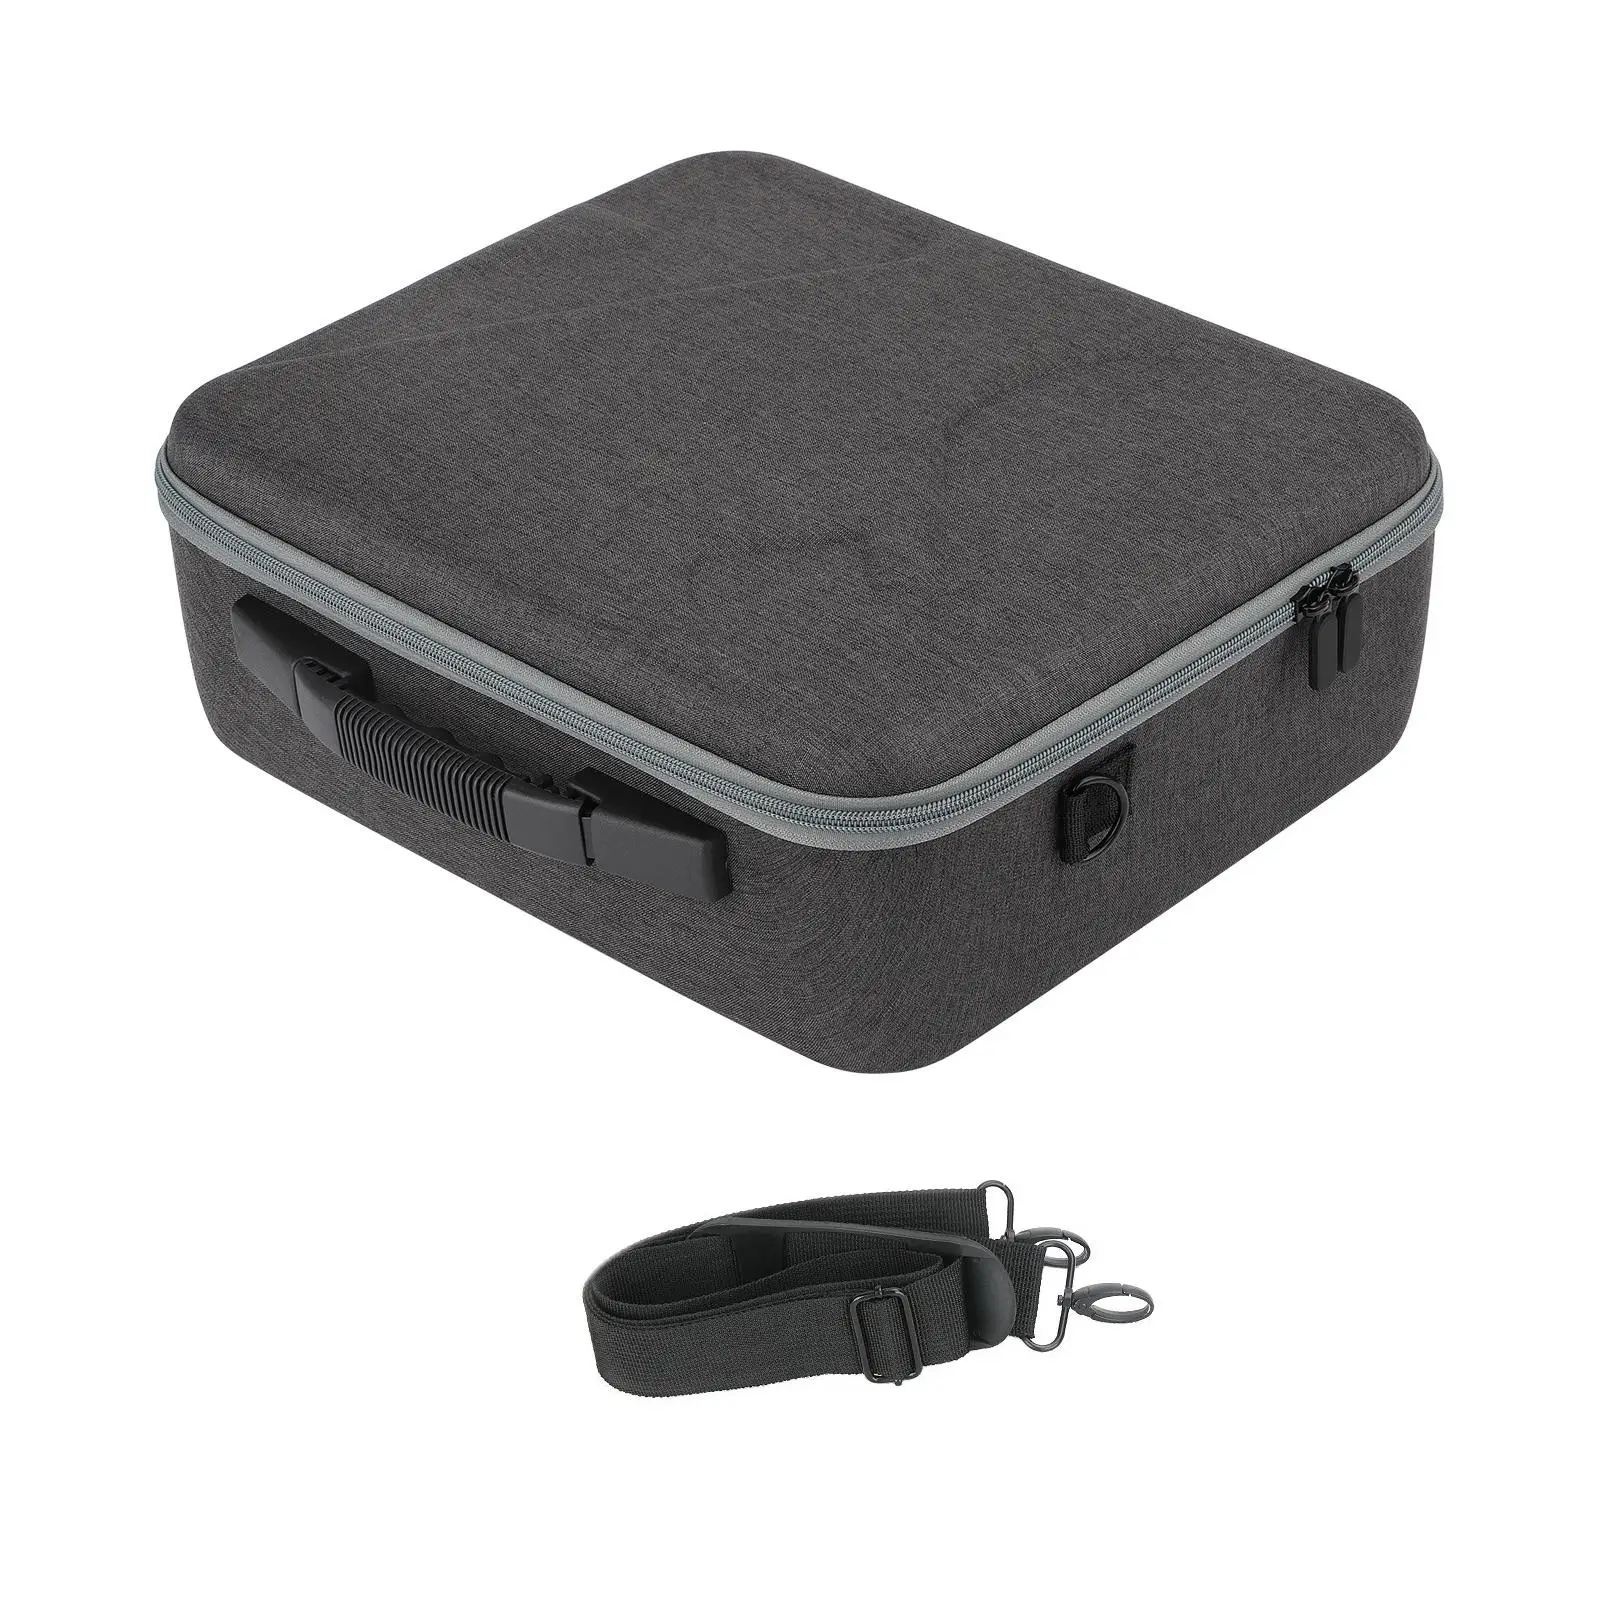 Hard Carrying Case Dustproof Shockproof Hard Protective Case for Mavic 3 Pro Helicopter Rc-n1 Mavic 3 Classic Remote Controller